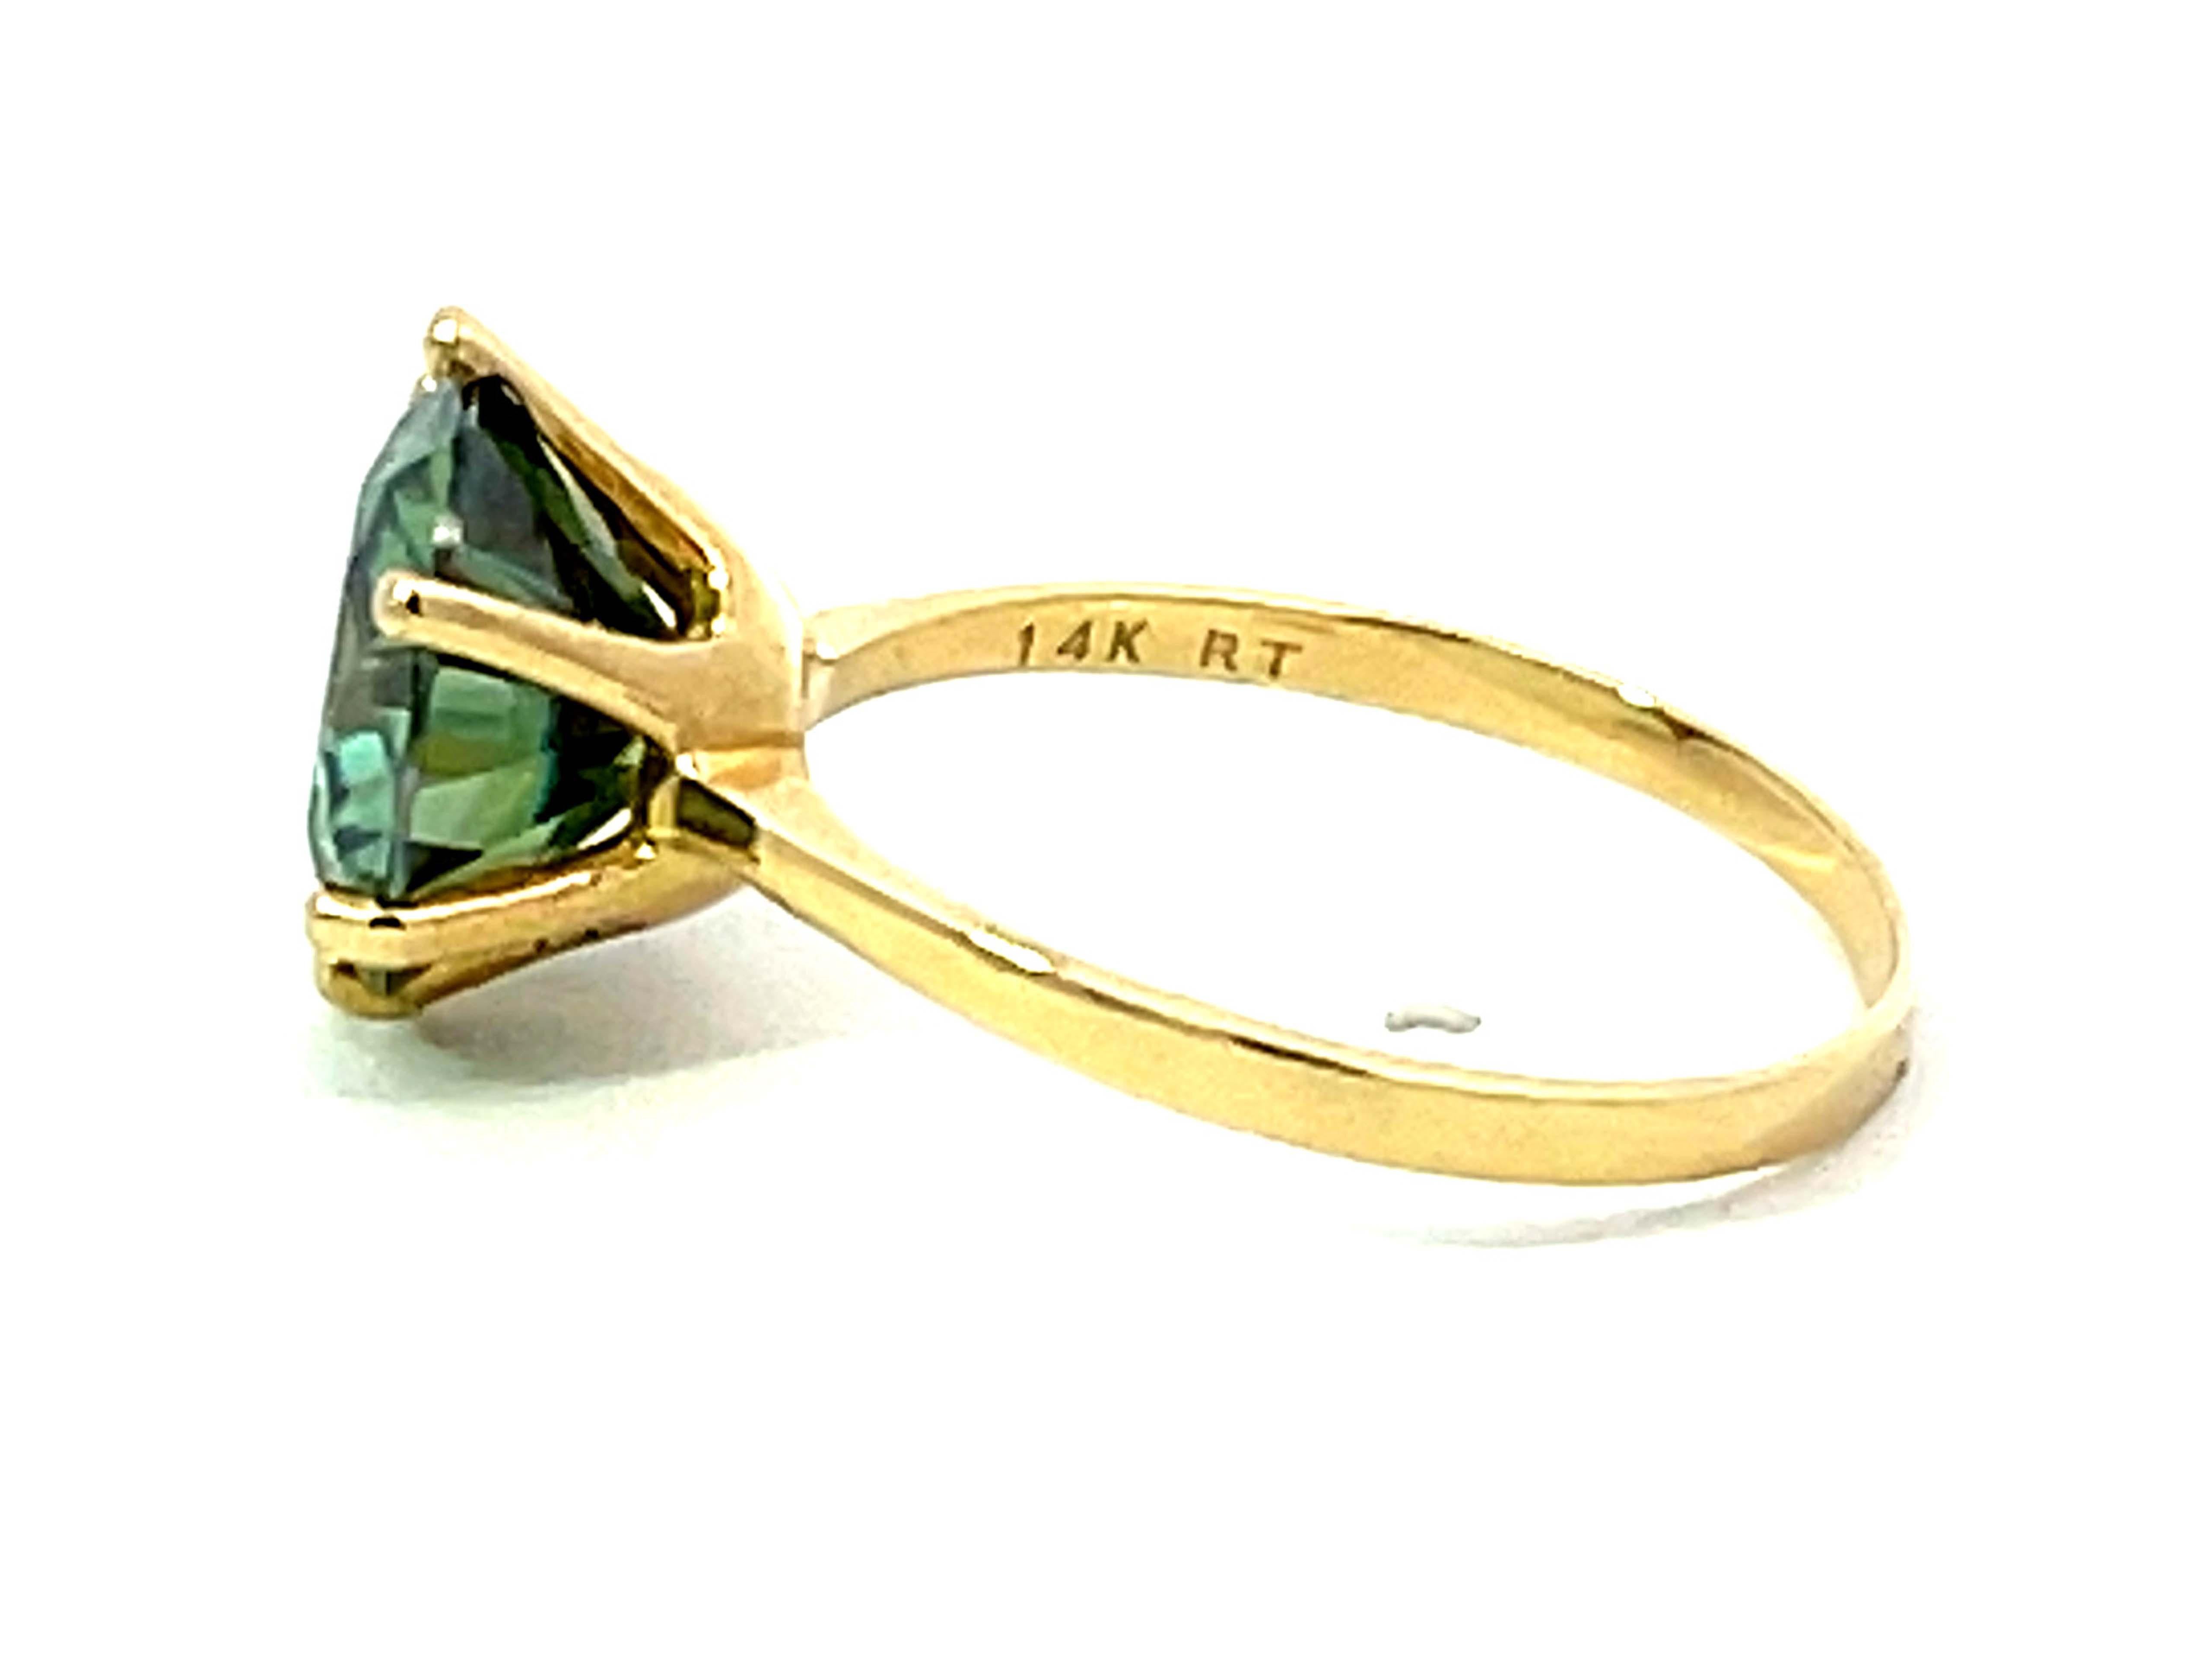 4 Carat Green Moissanite Ring in 14K Yellow Gold For Sale 1